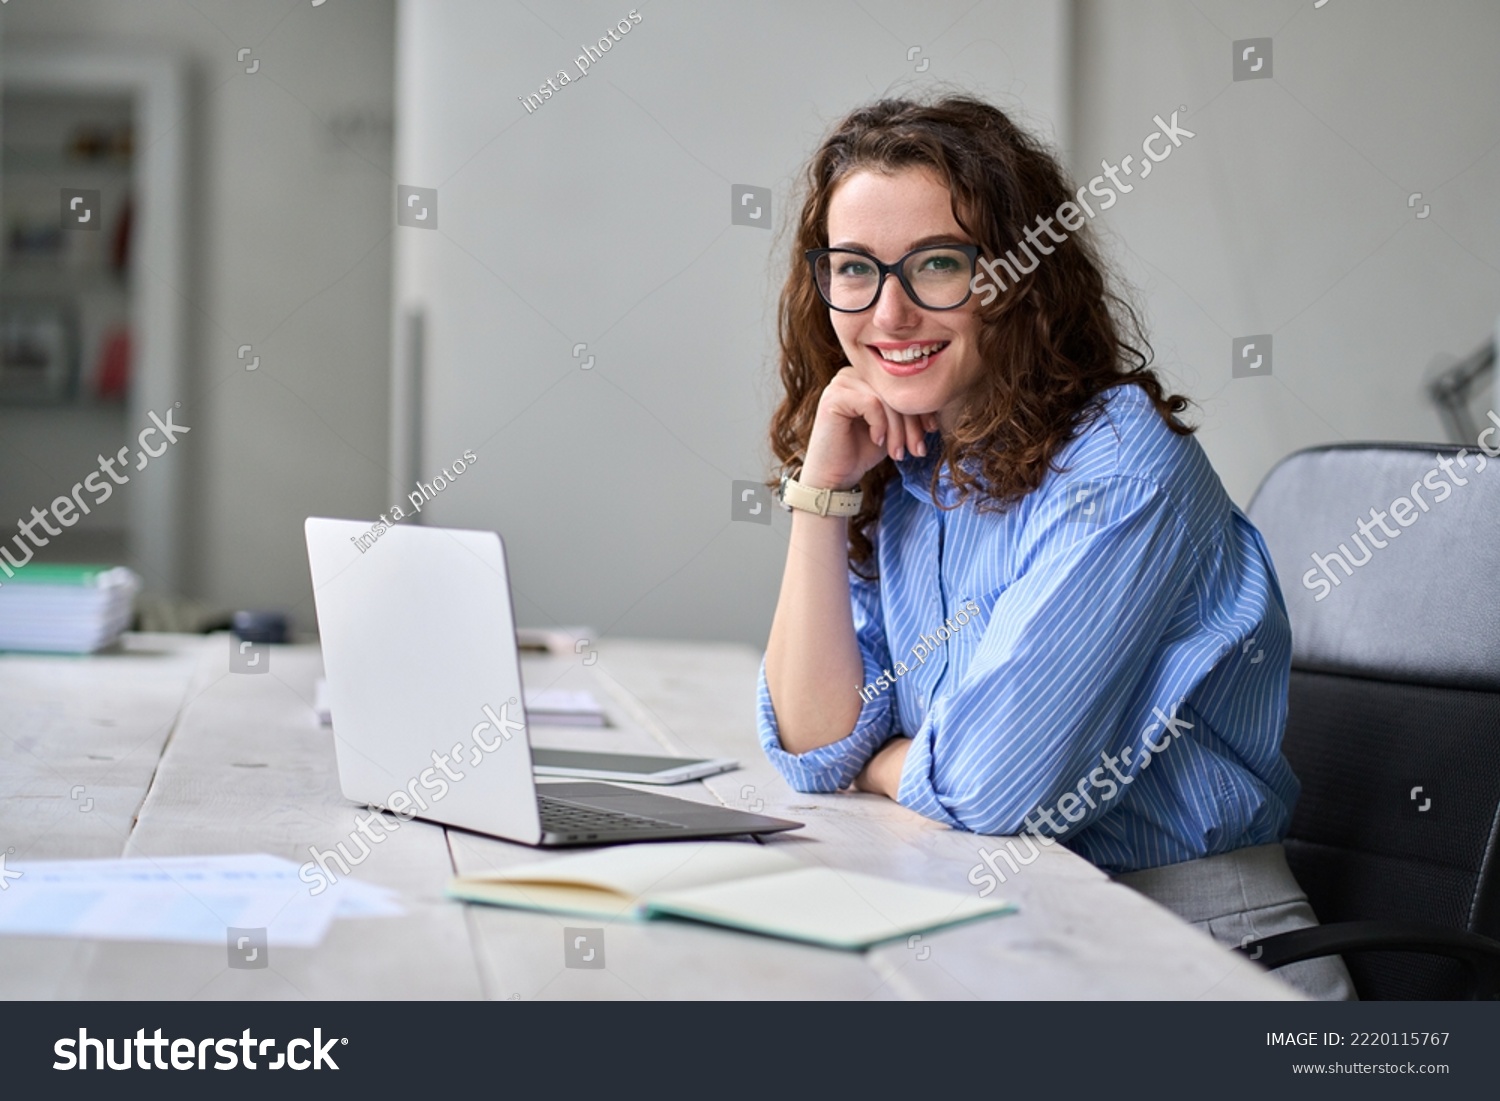 Young happy business woman company employee sitting at desk working on laptop. Smiling female professional entrepreneur worker using computer in corporate modern office looking at camera. Portrait. #2220115767